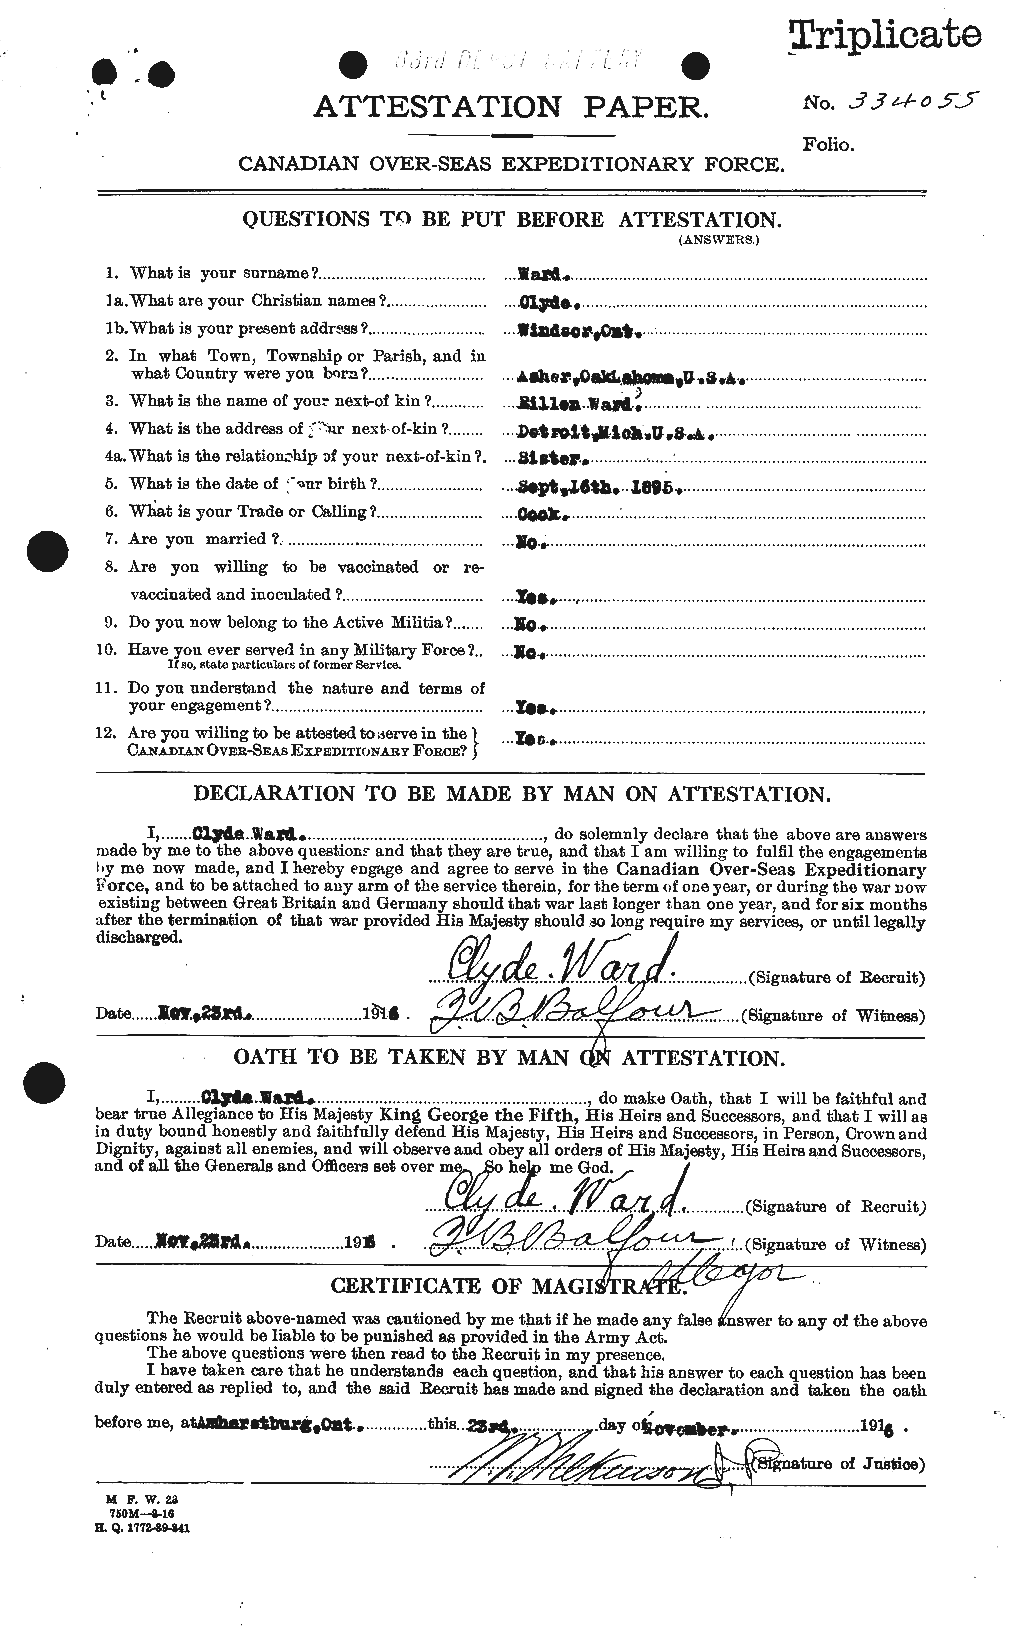 Personnel Records of the First World War - CEF 657610a